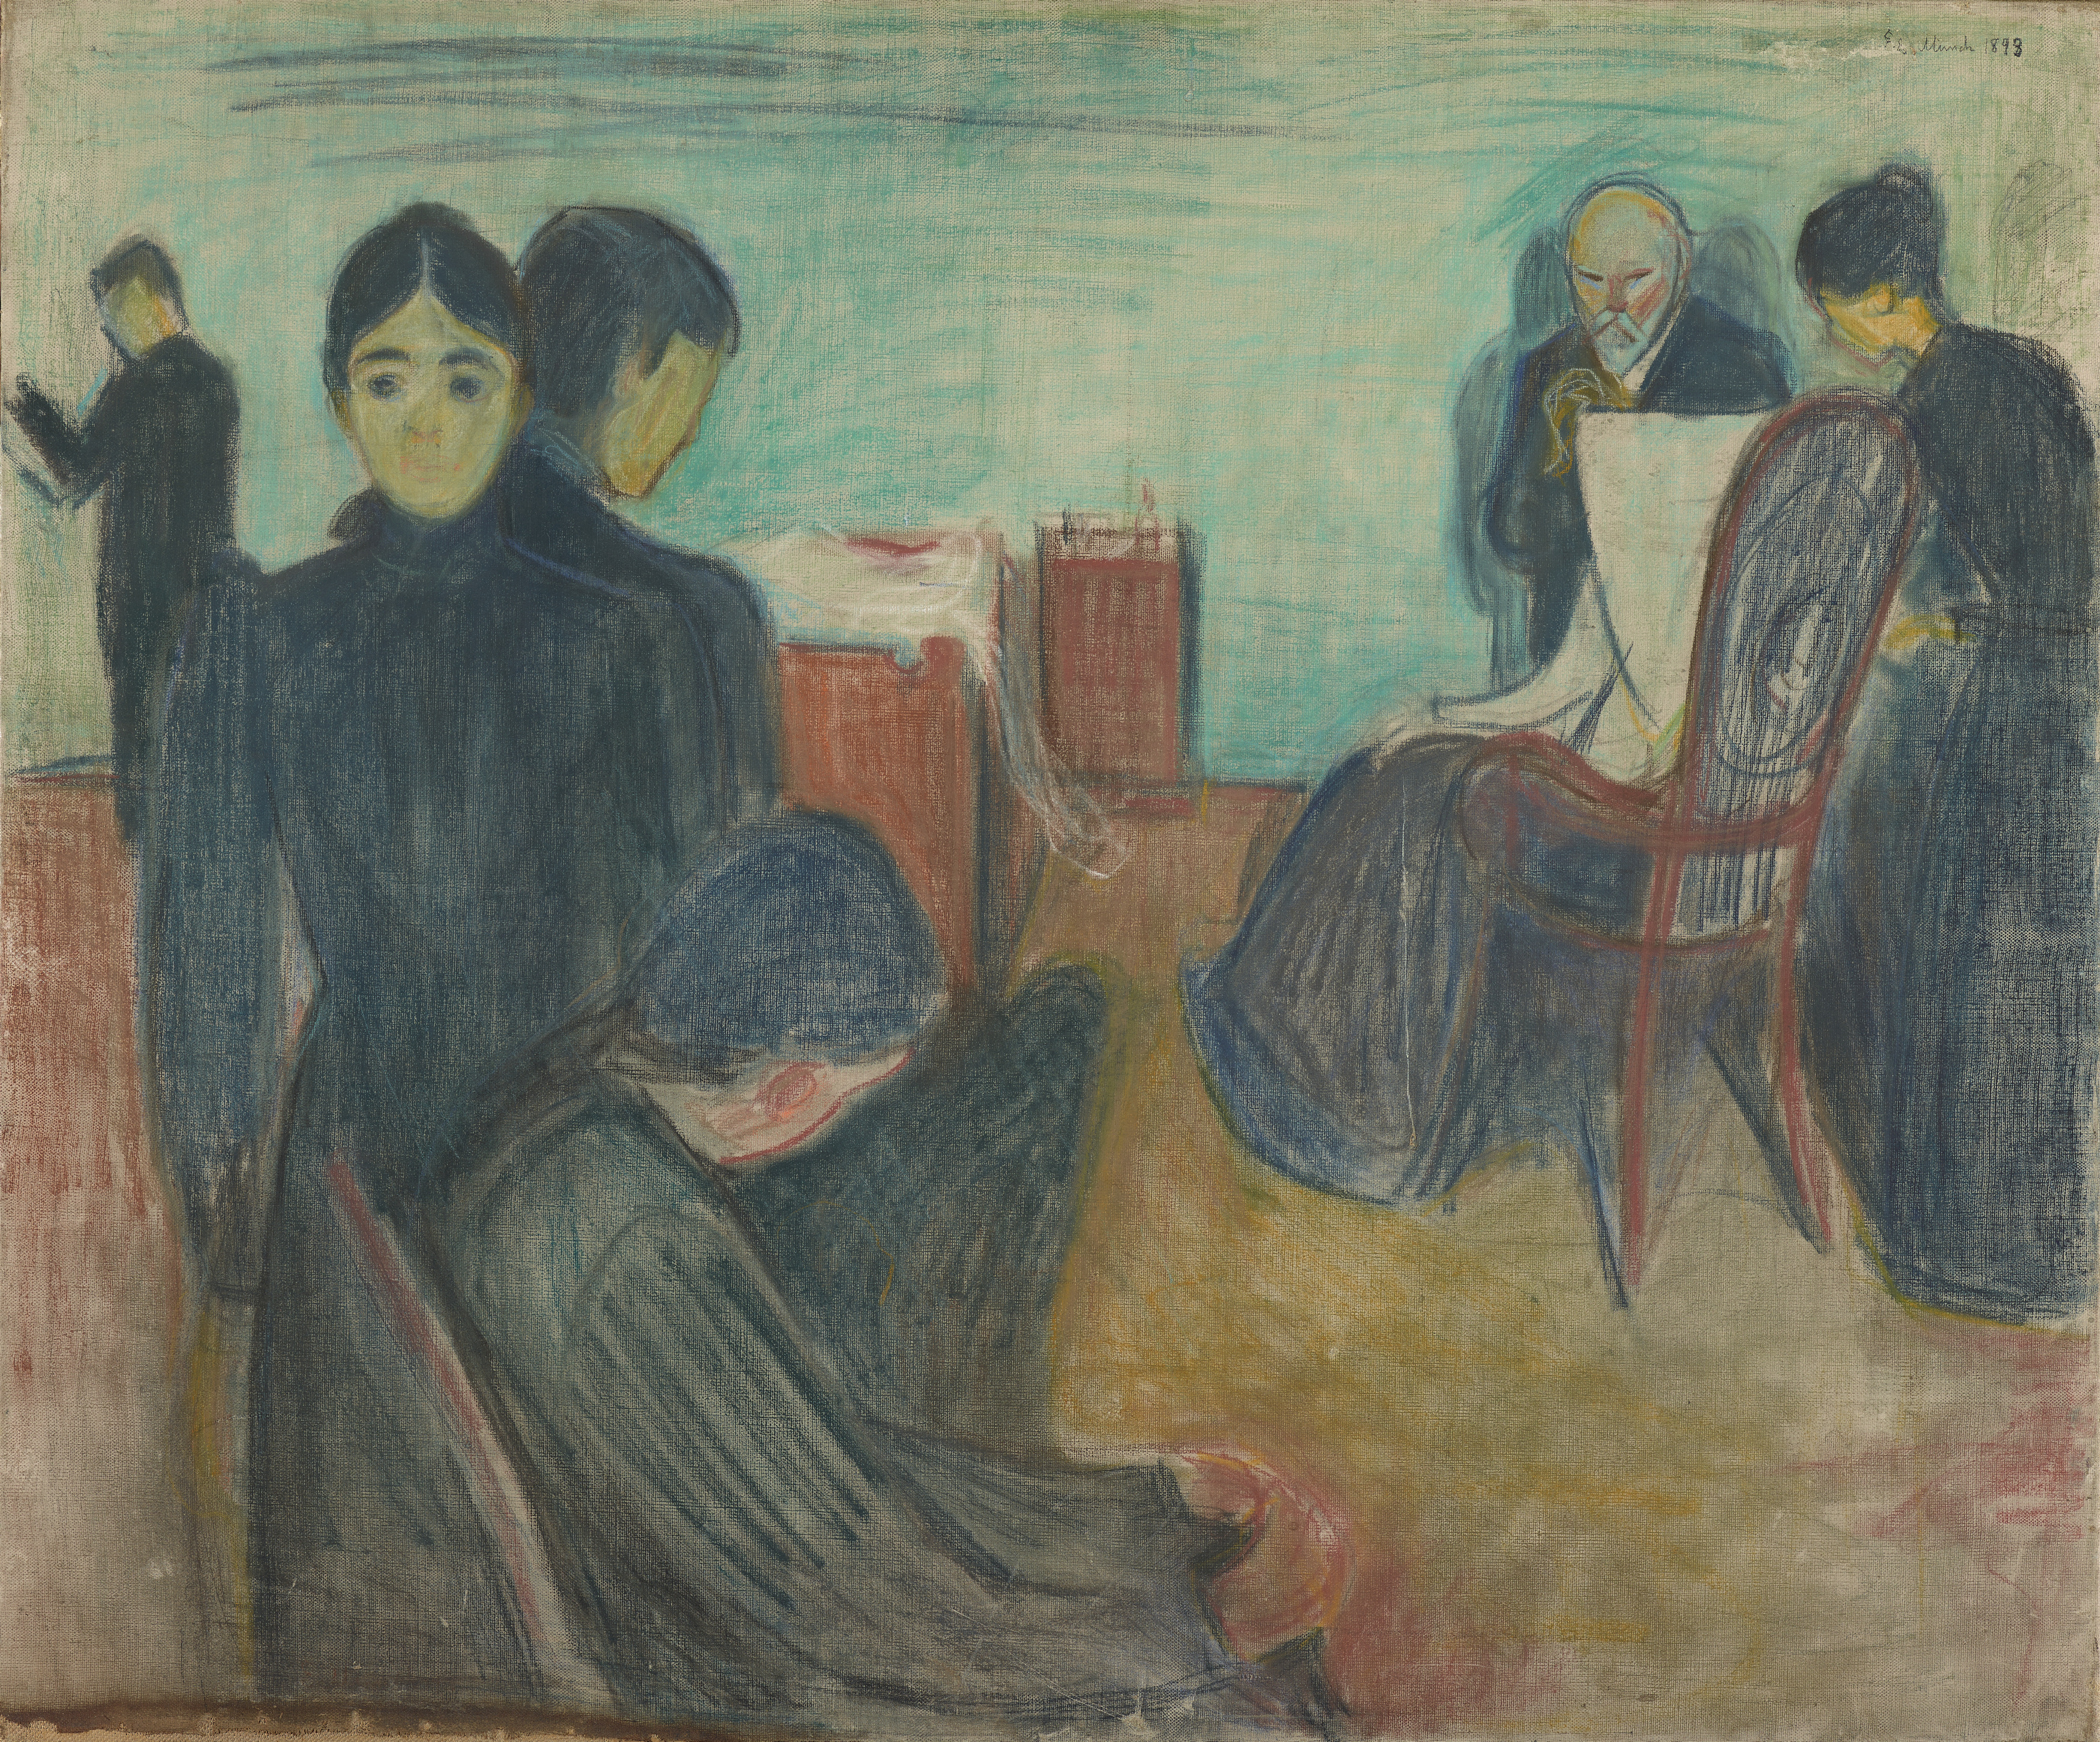 Edvard Munch: Death in the Sickroom. Pastel on canvas, 1893. Photo © Munchmuseet